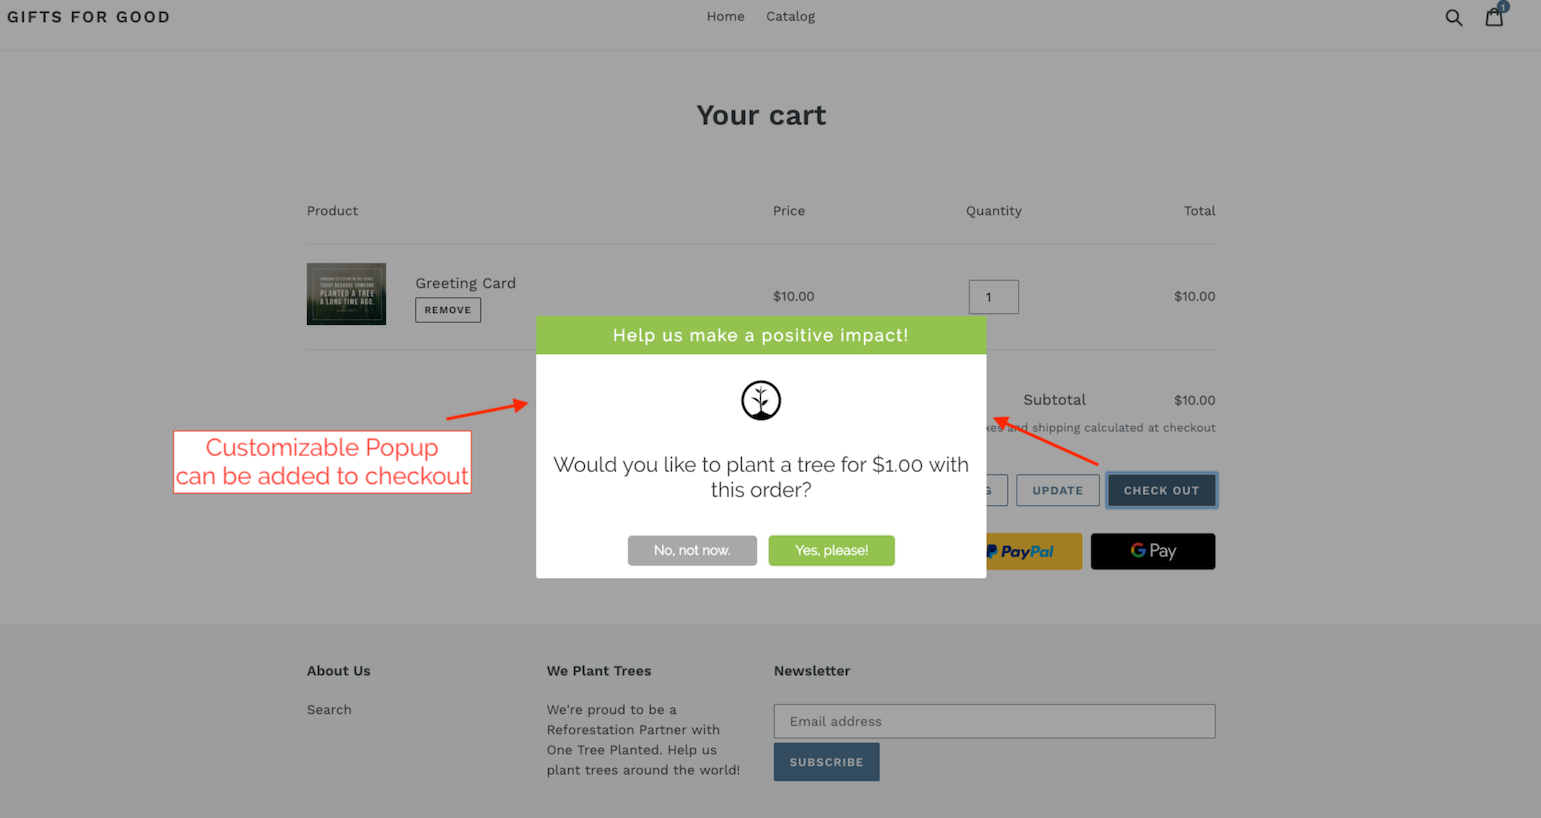 a screenshot of One Tree Planted at Checkout in action, giving a consumer the option of giving $1.00 to plant a tree